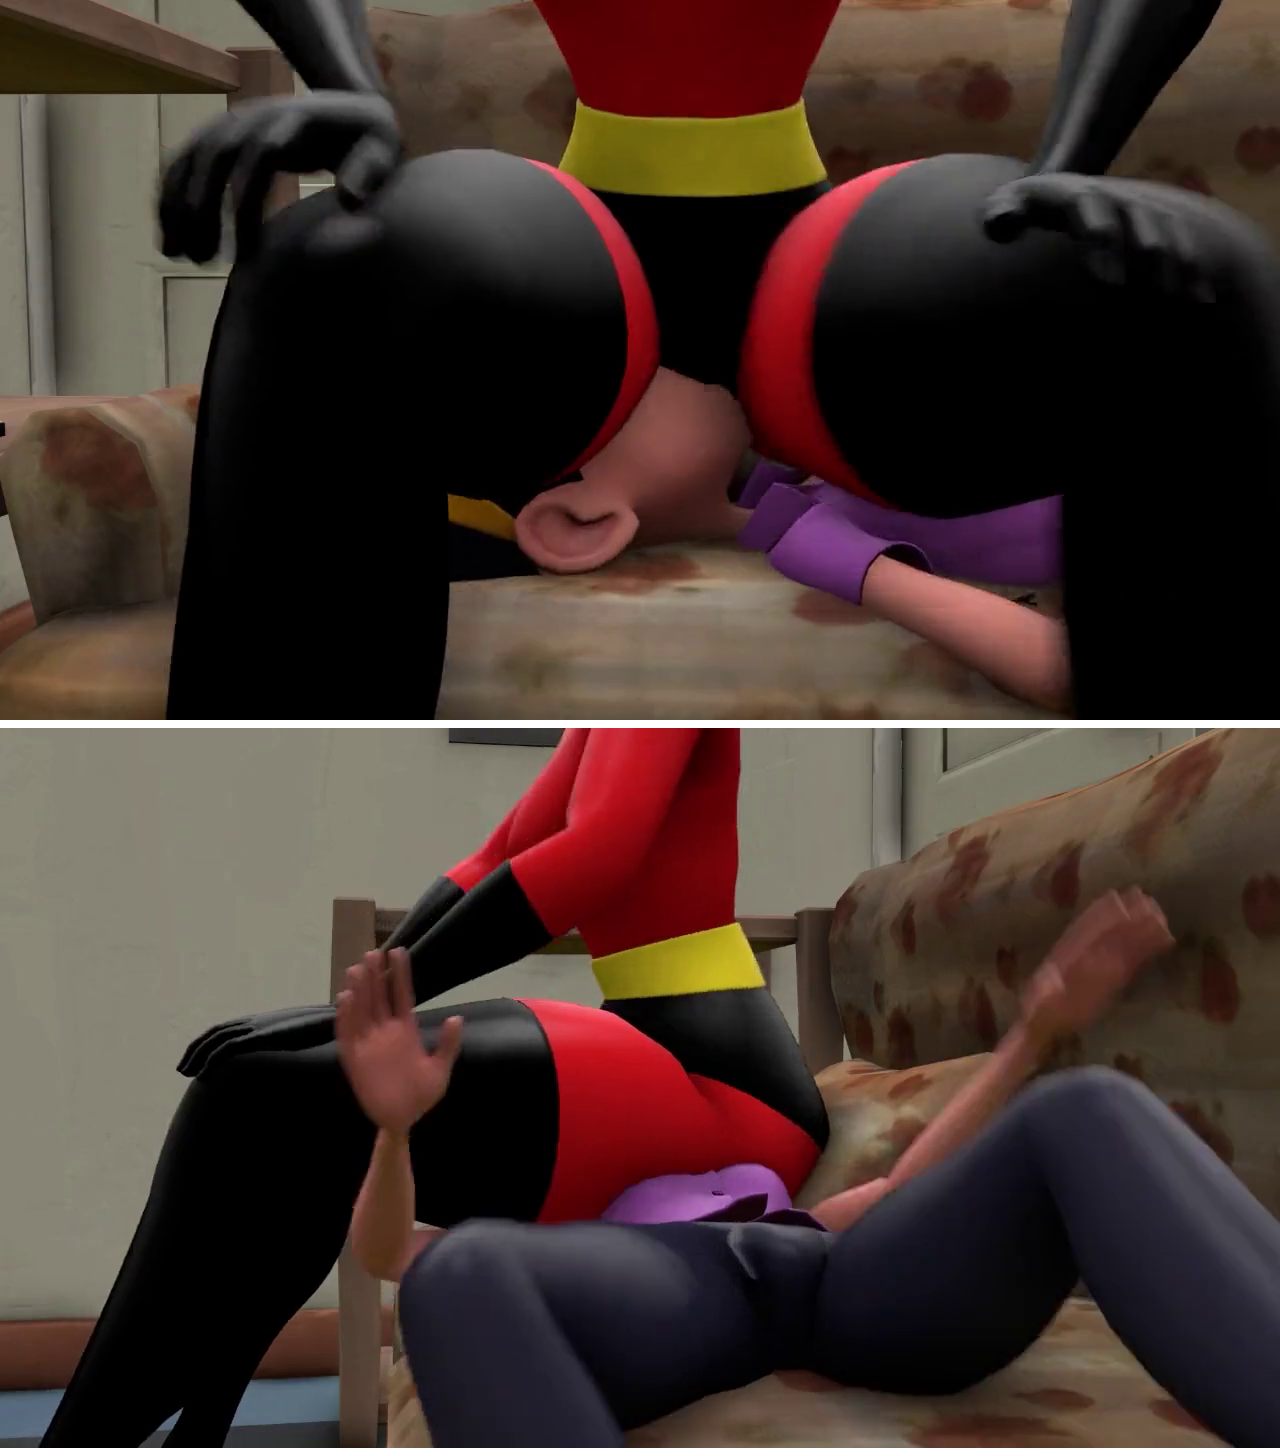 Incestible Analingus parody porn The Incredibles